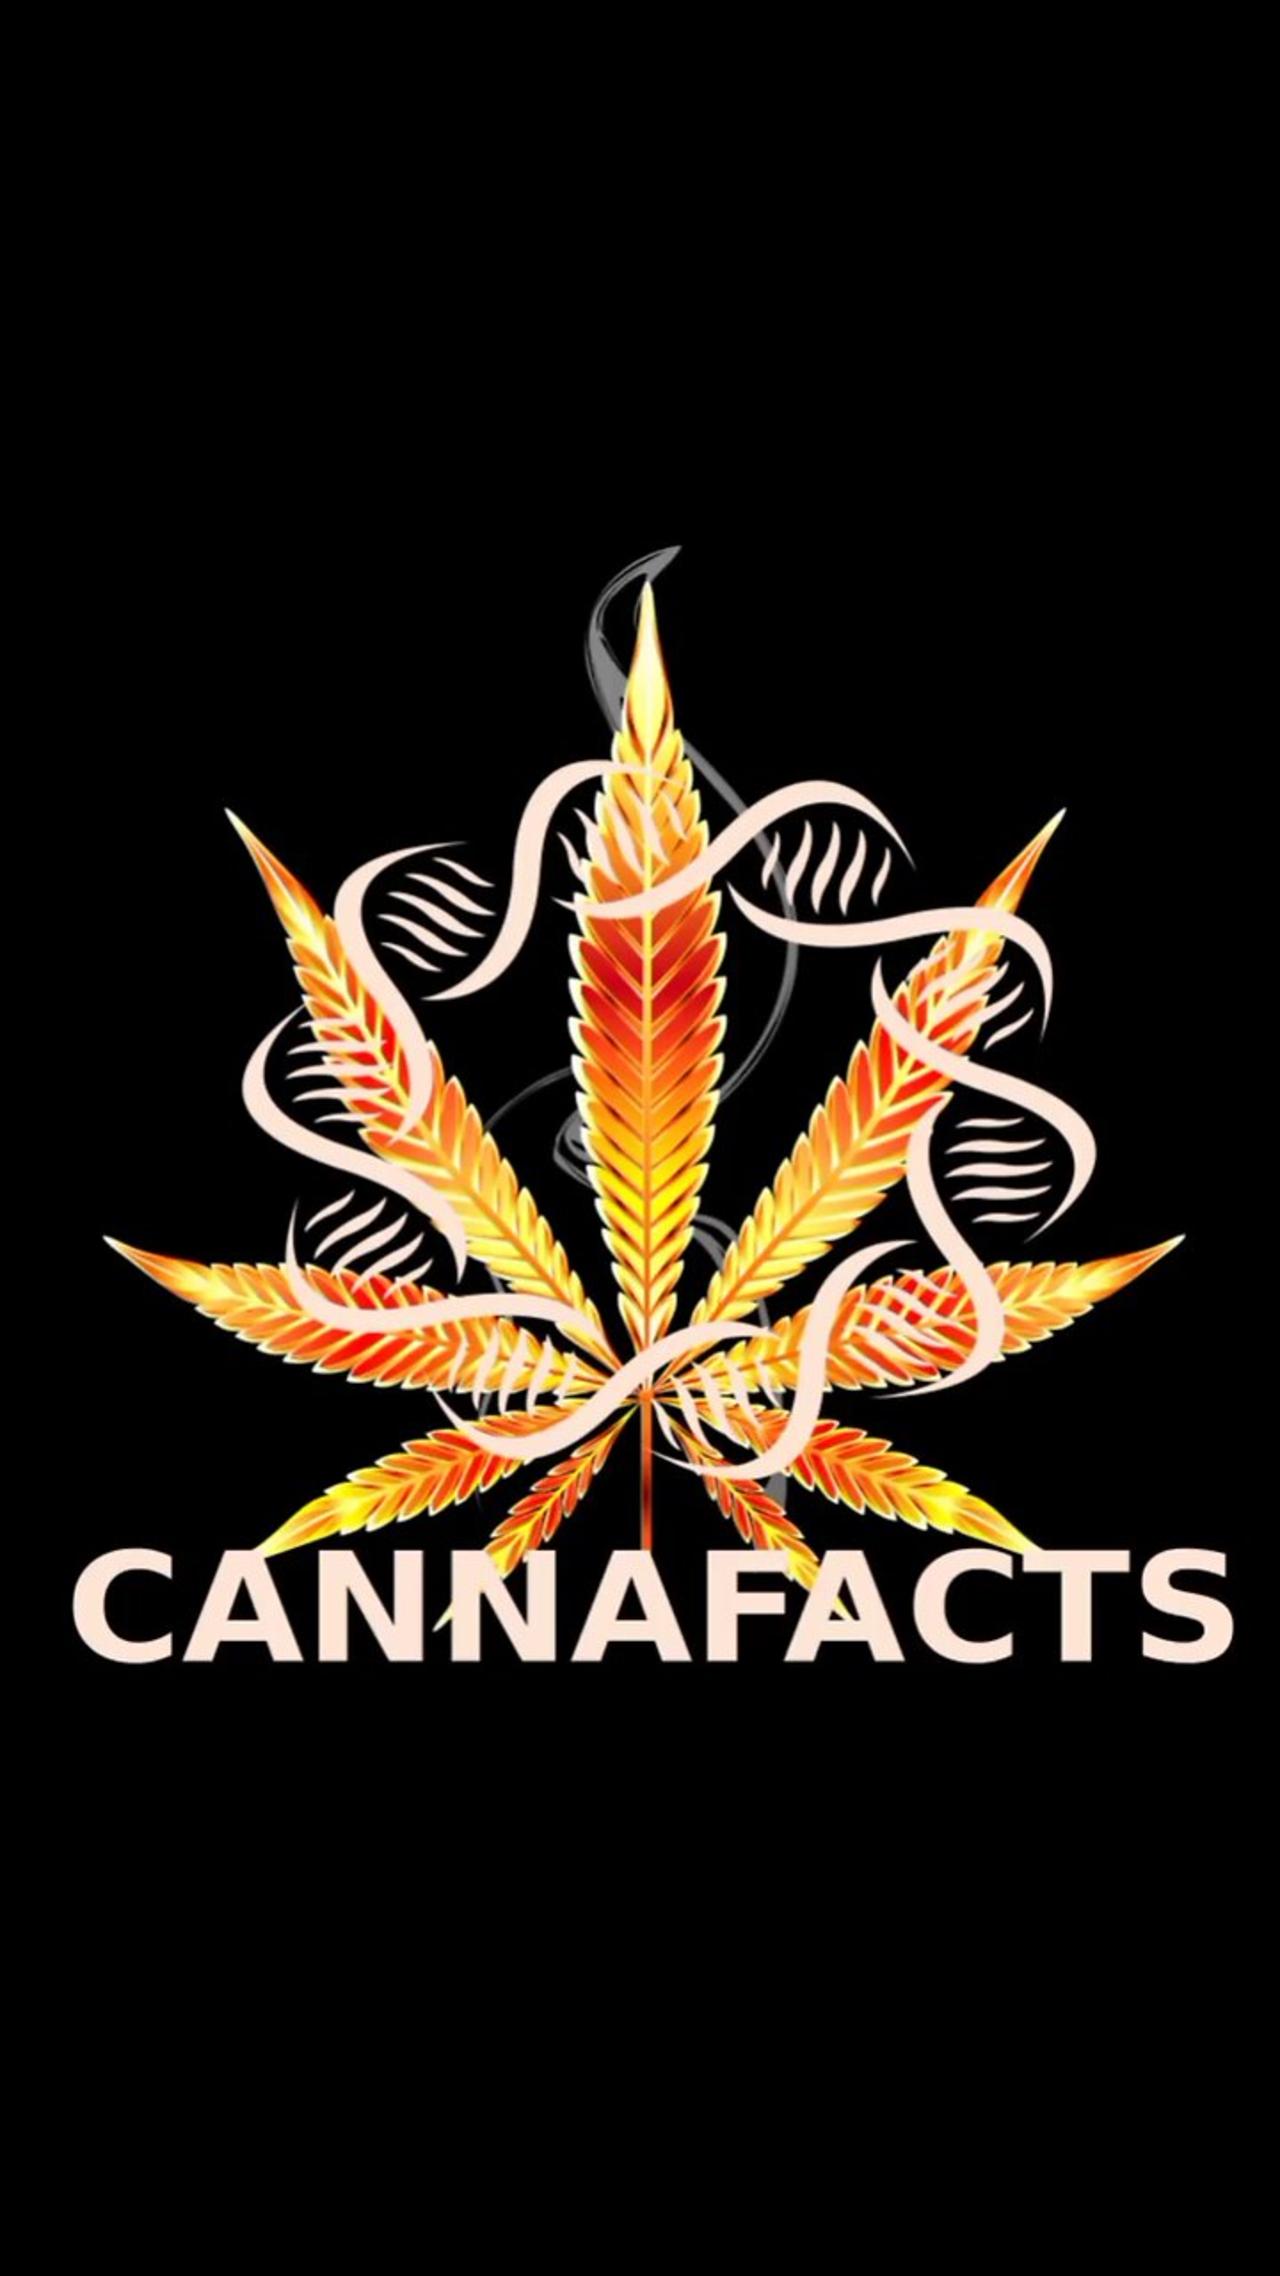 Cannafacts Podcast Episode 1 online now at YouTube Podbean and Spotify